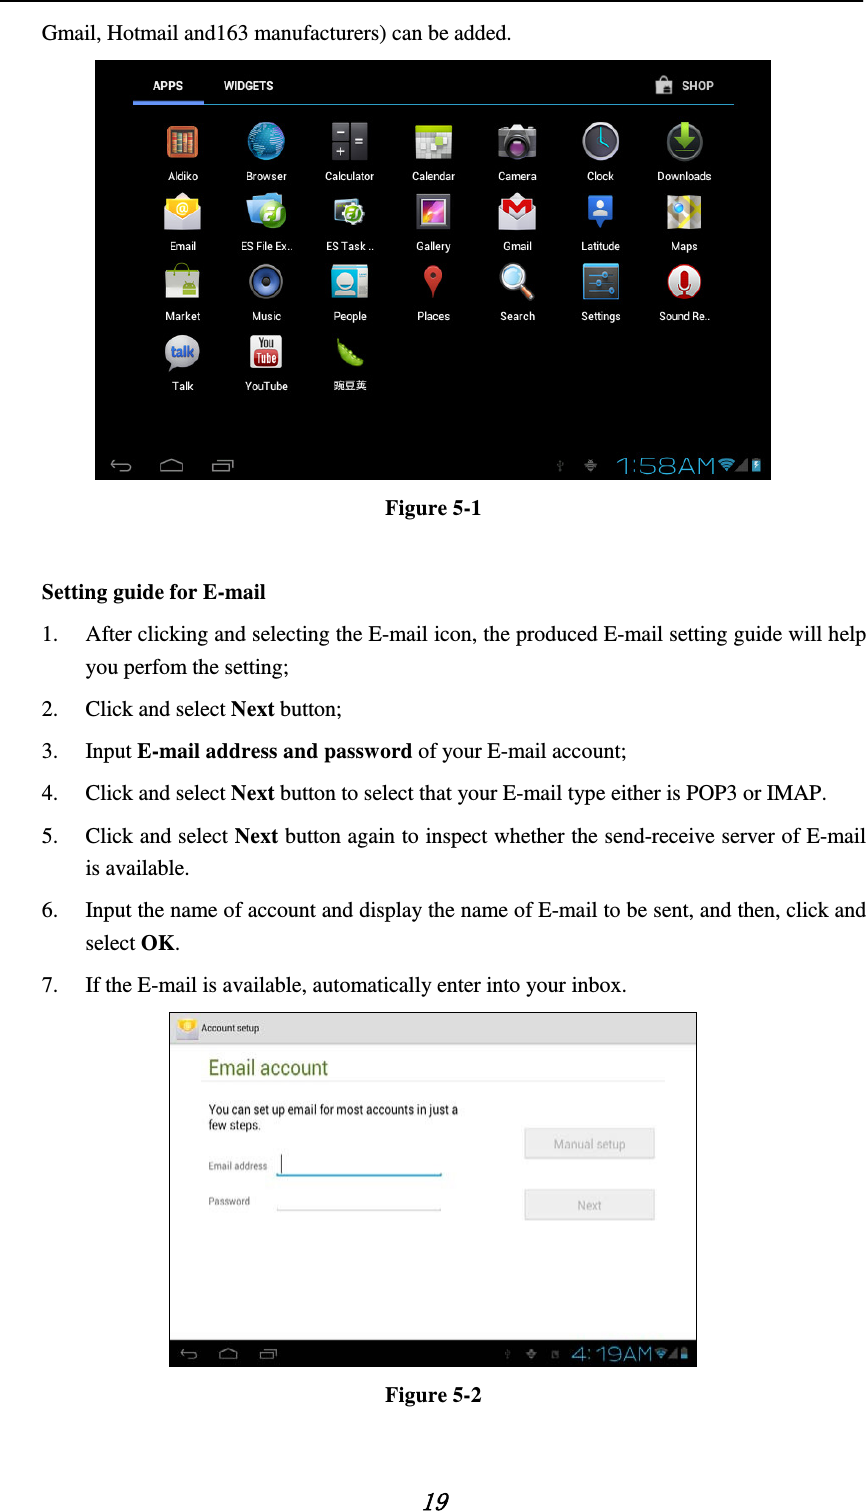    19 Gmail, Hotmail and163 manufacturers) can be added.  Figure 5-1  Setting guide for E-mail   1. After clicking and selecting the E-mail icon, the produced E-mail setting guide will help you perfom the setting;   2. Click and select Next button;   3. Input E-mail address and password of your E-mail account;     4. Click and select Next button to select that your E-mail type either is POP3 or IMAP. 5. Click and select Next button again to inspect whether the send-receive server of E-mail is available.   6. Input the name of account and display the name of E-mail to be sent, and then, click and select OK. 7. If the E-mail is available, automatically enter into your inbox.  Figure 5-2  